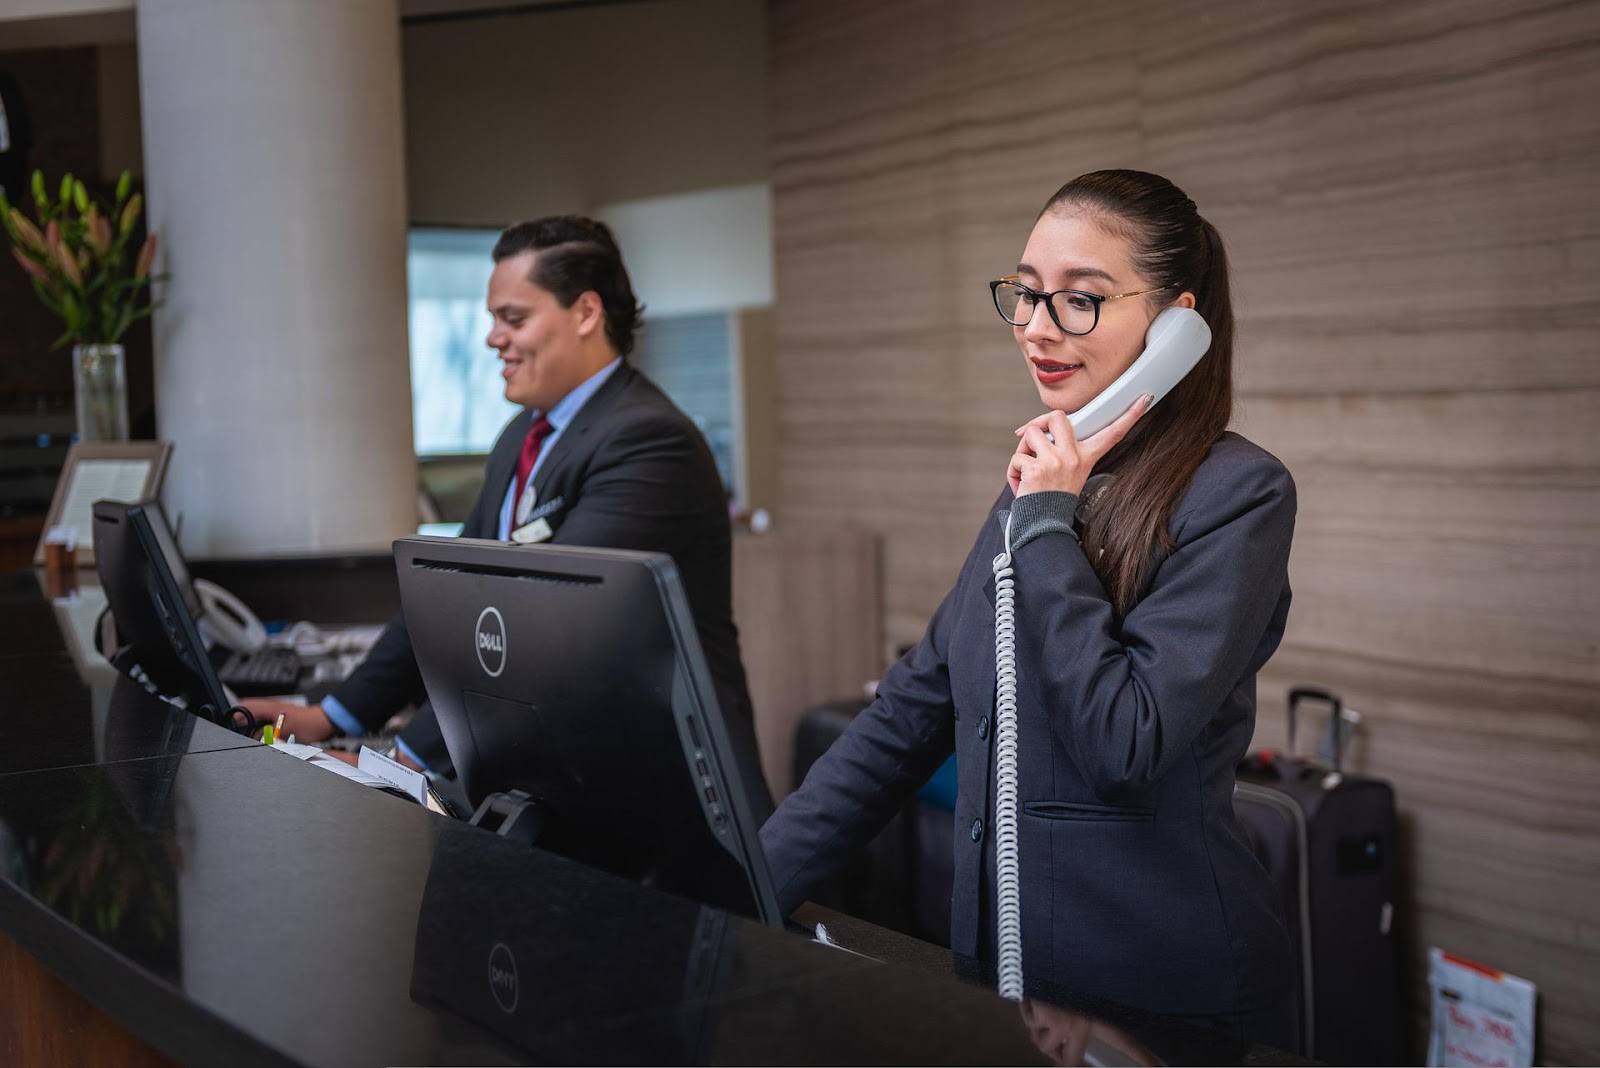 employee on the phone at reception desk good business impression